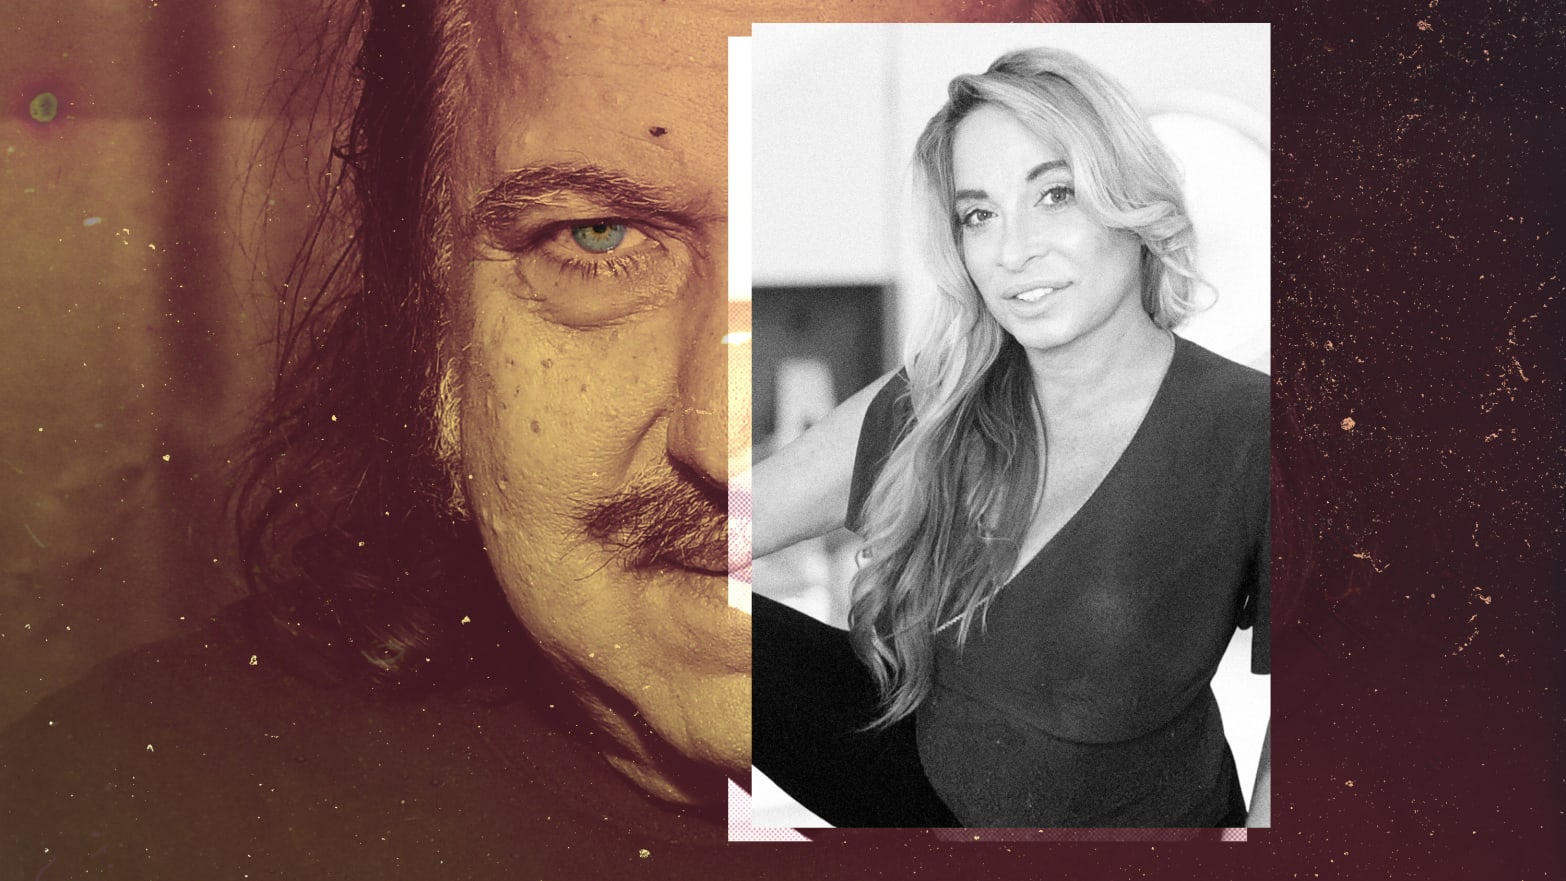 Sleeping Daughter Molested And Fucked - Ron Jeremy Rape Accuser Jennifer Steele Mondello Comes Forward, Says 'I  Wondered if He Planned to Kill Me'